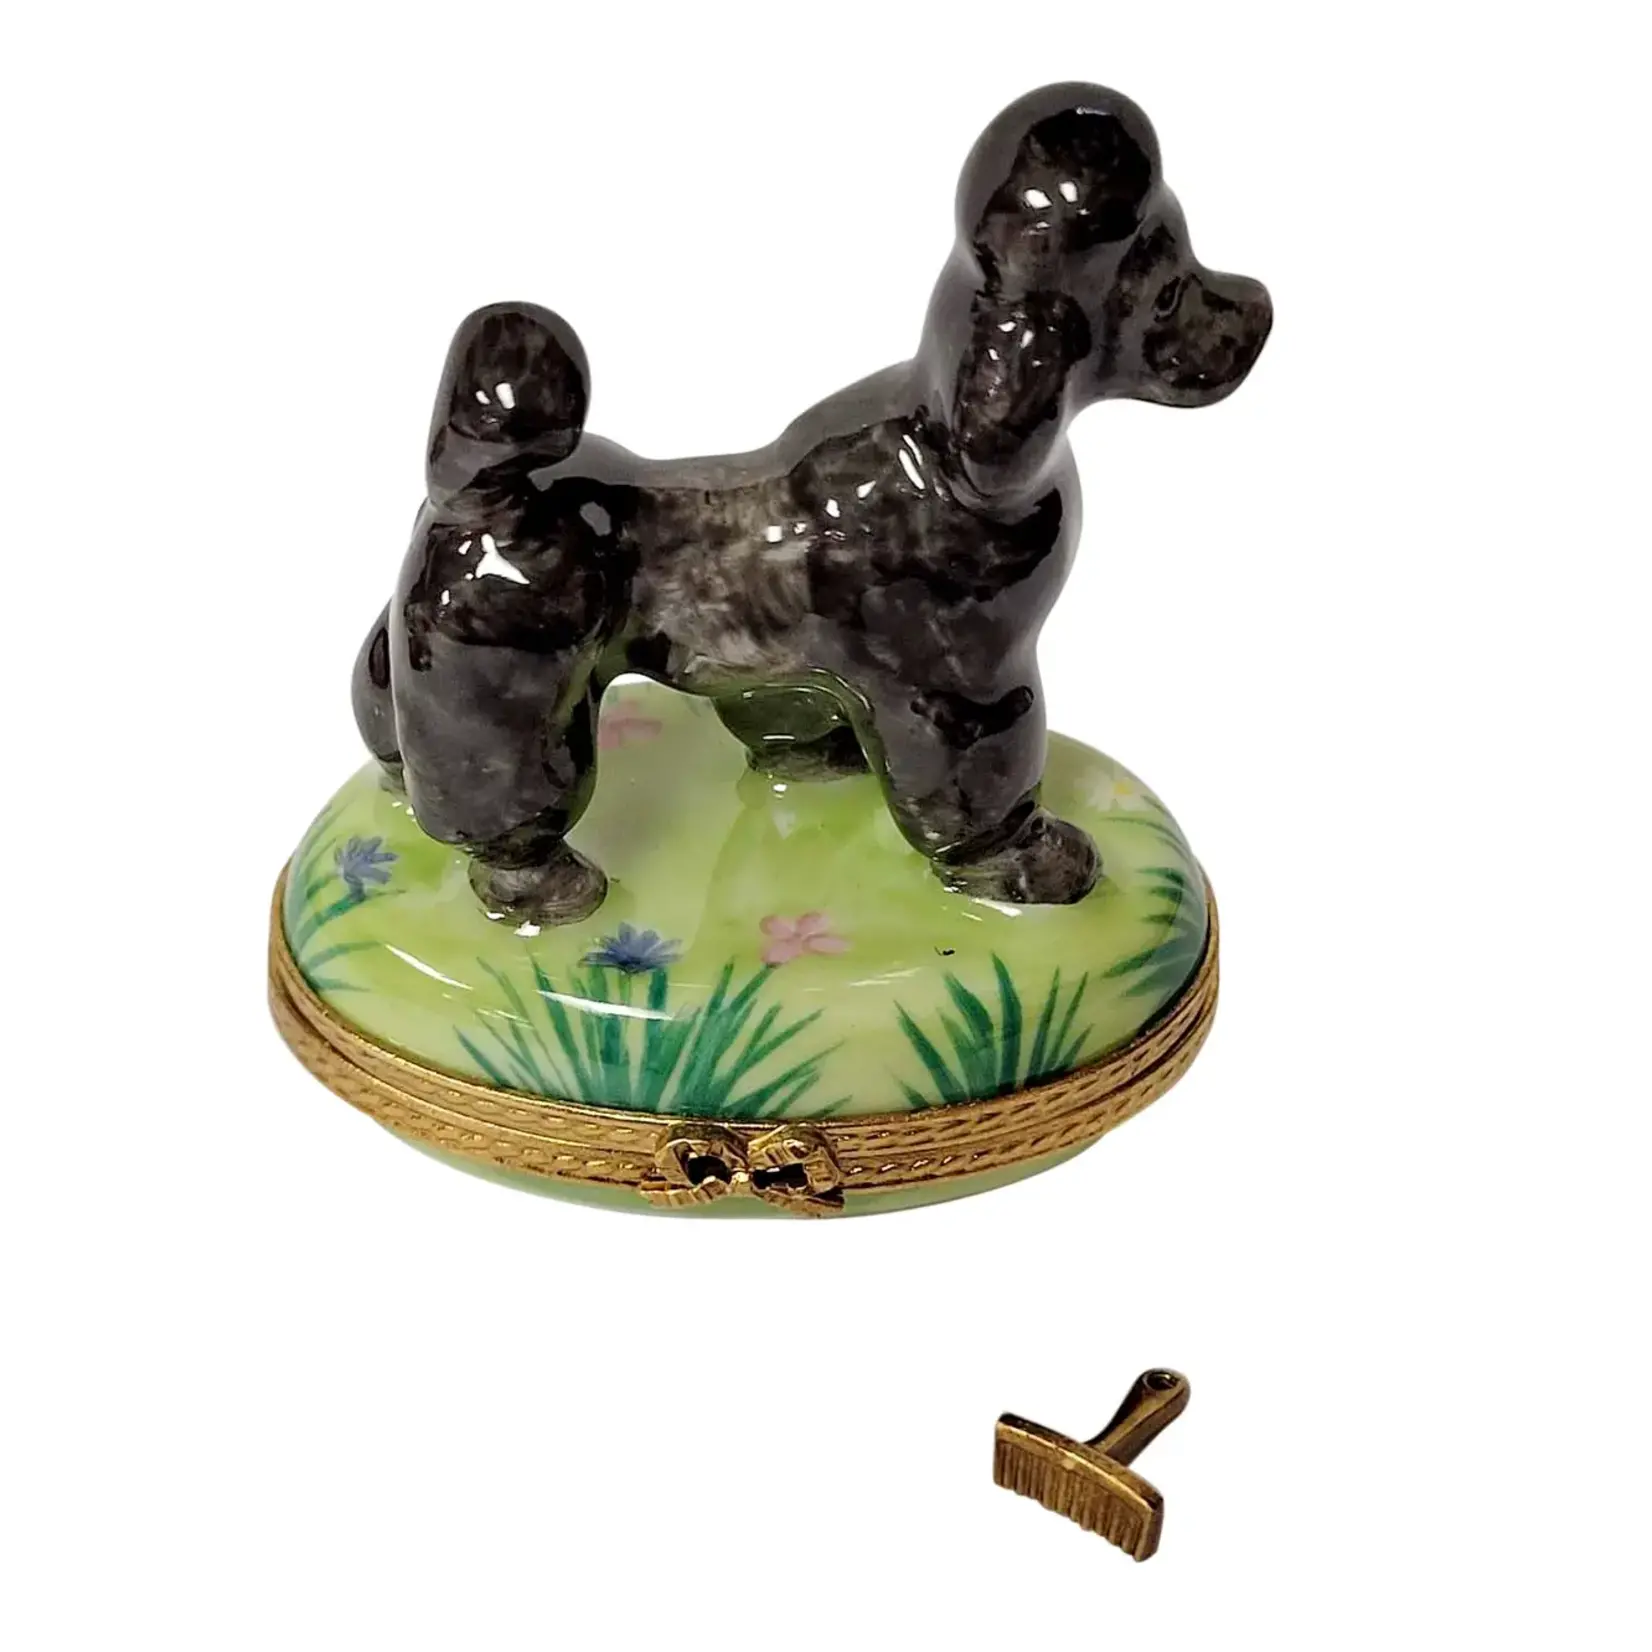 Rochard Limoges Black Poodle With Removable Grooming Tool